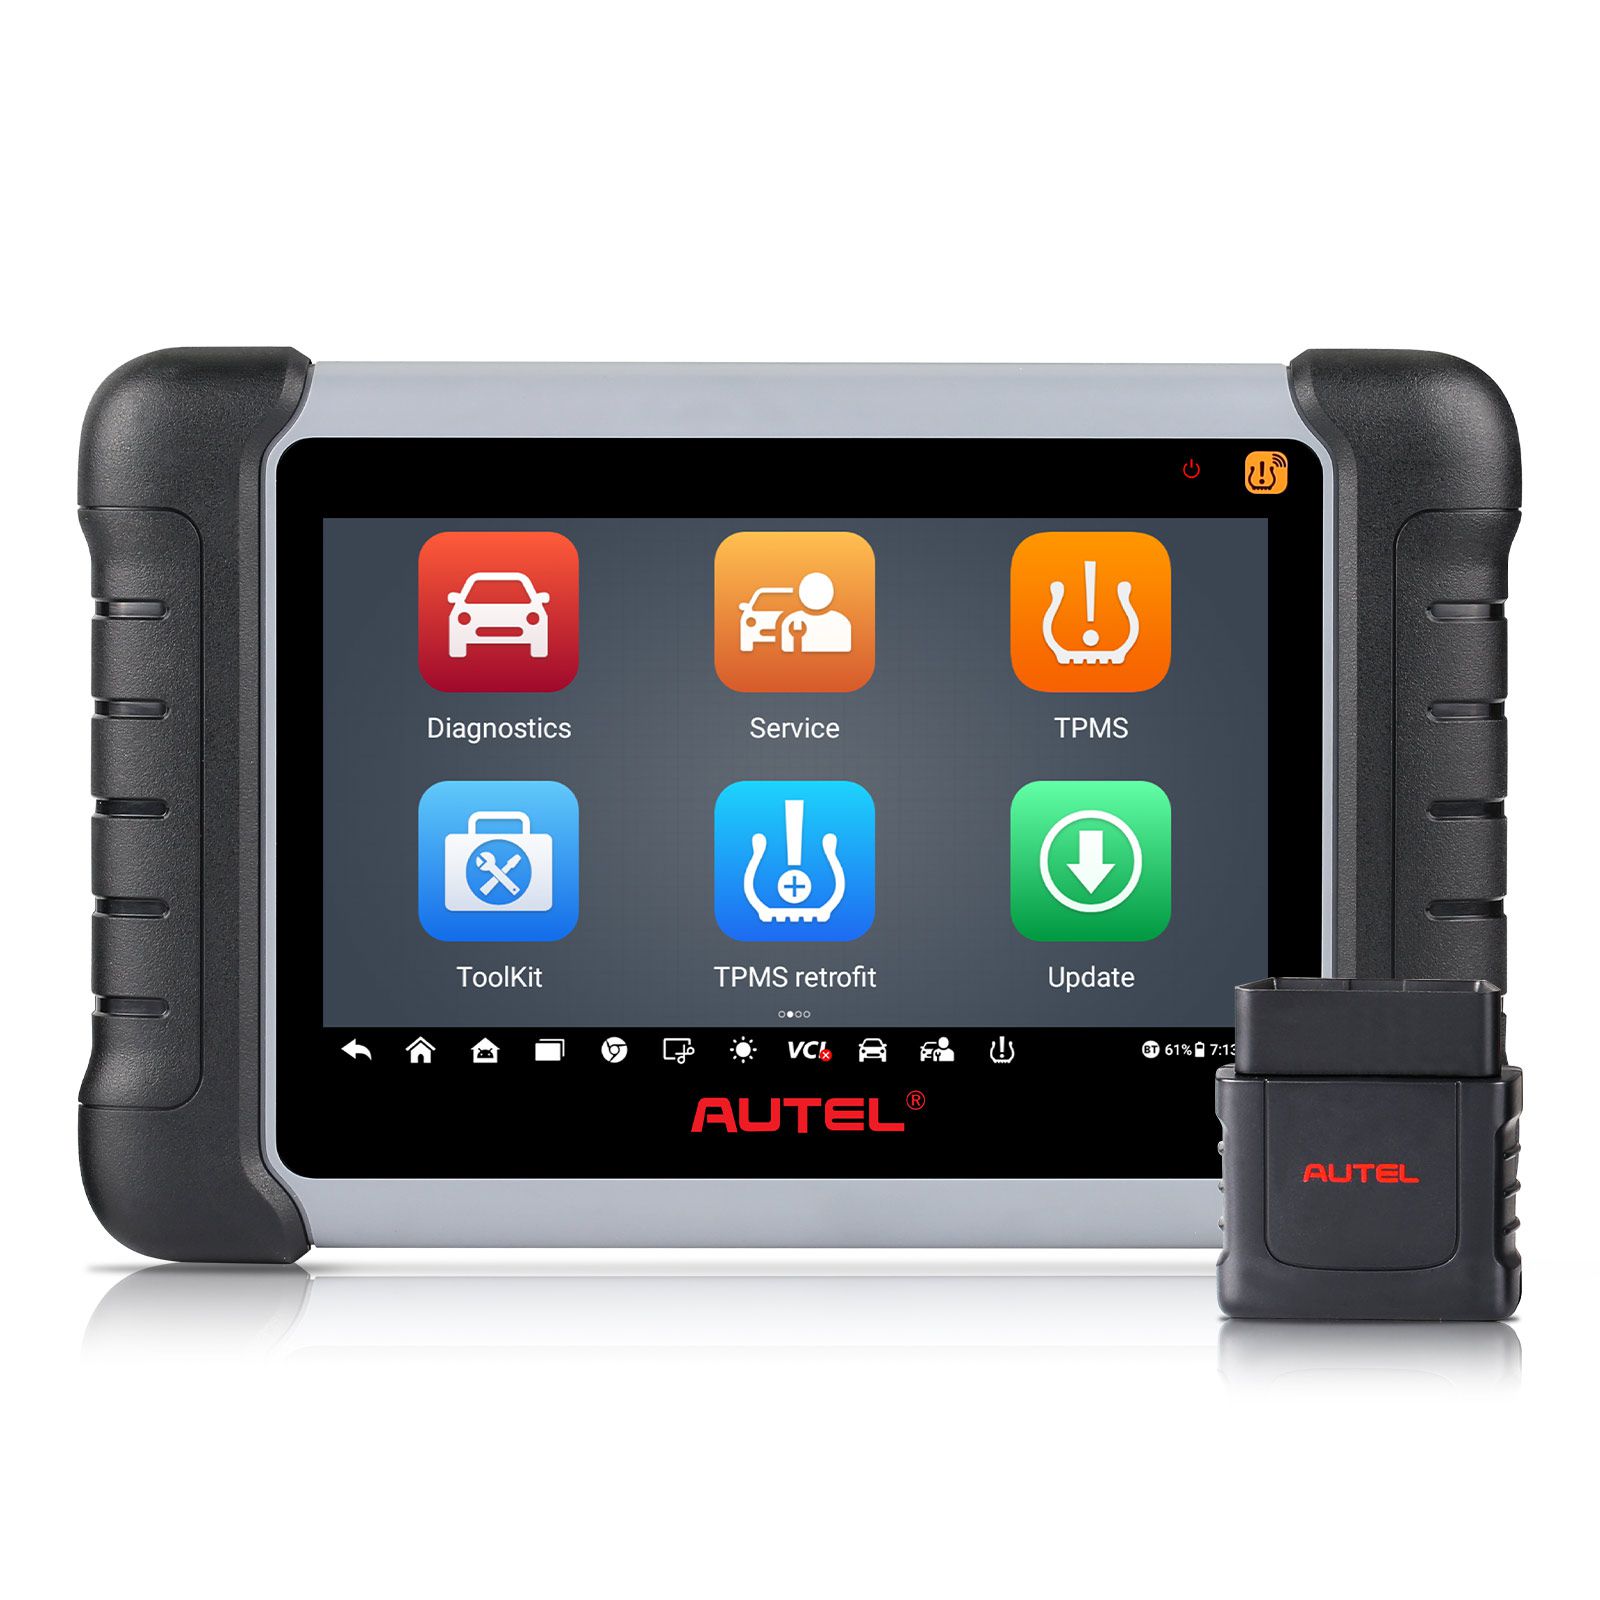 2023 Autel MaxiCOM MK808S-TS Bidirectional & TPMS Programming Relearn Tool with 28+ Special Functions AutoAuth for FCA SGW Upgrade of MK808TS/ MK808BT